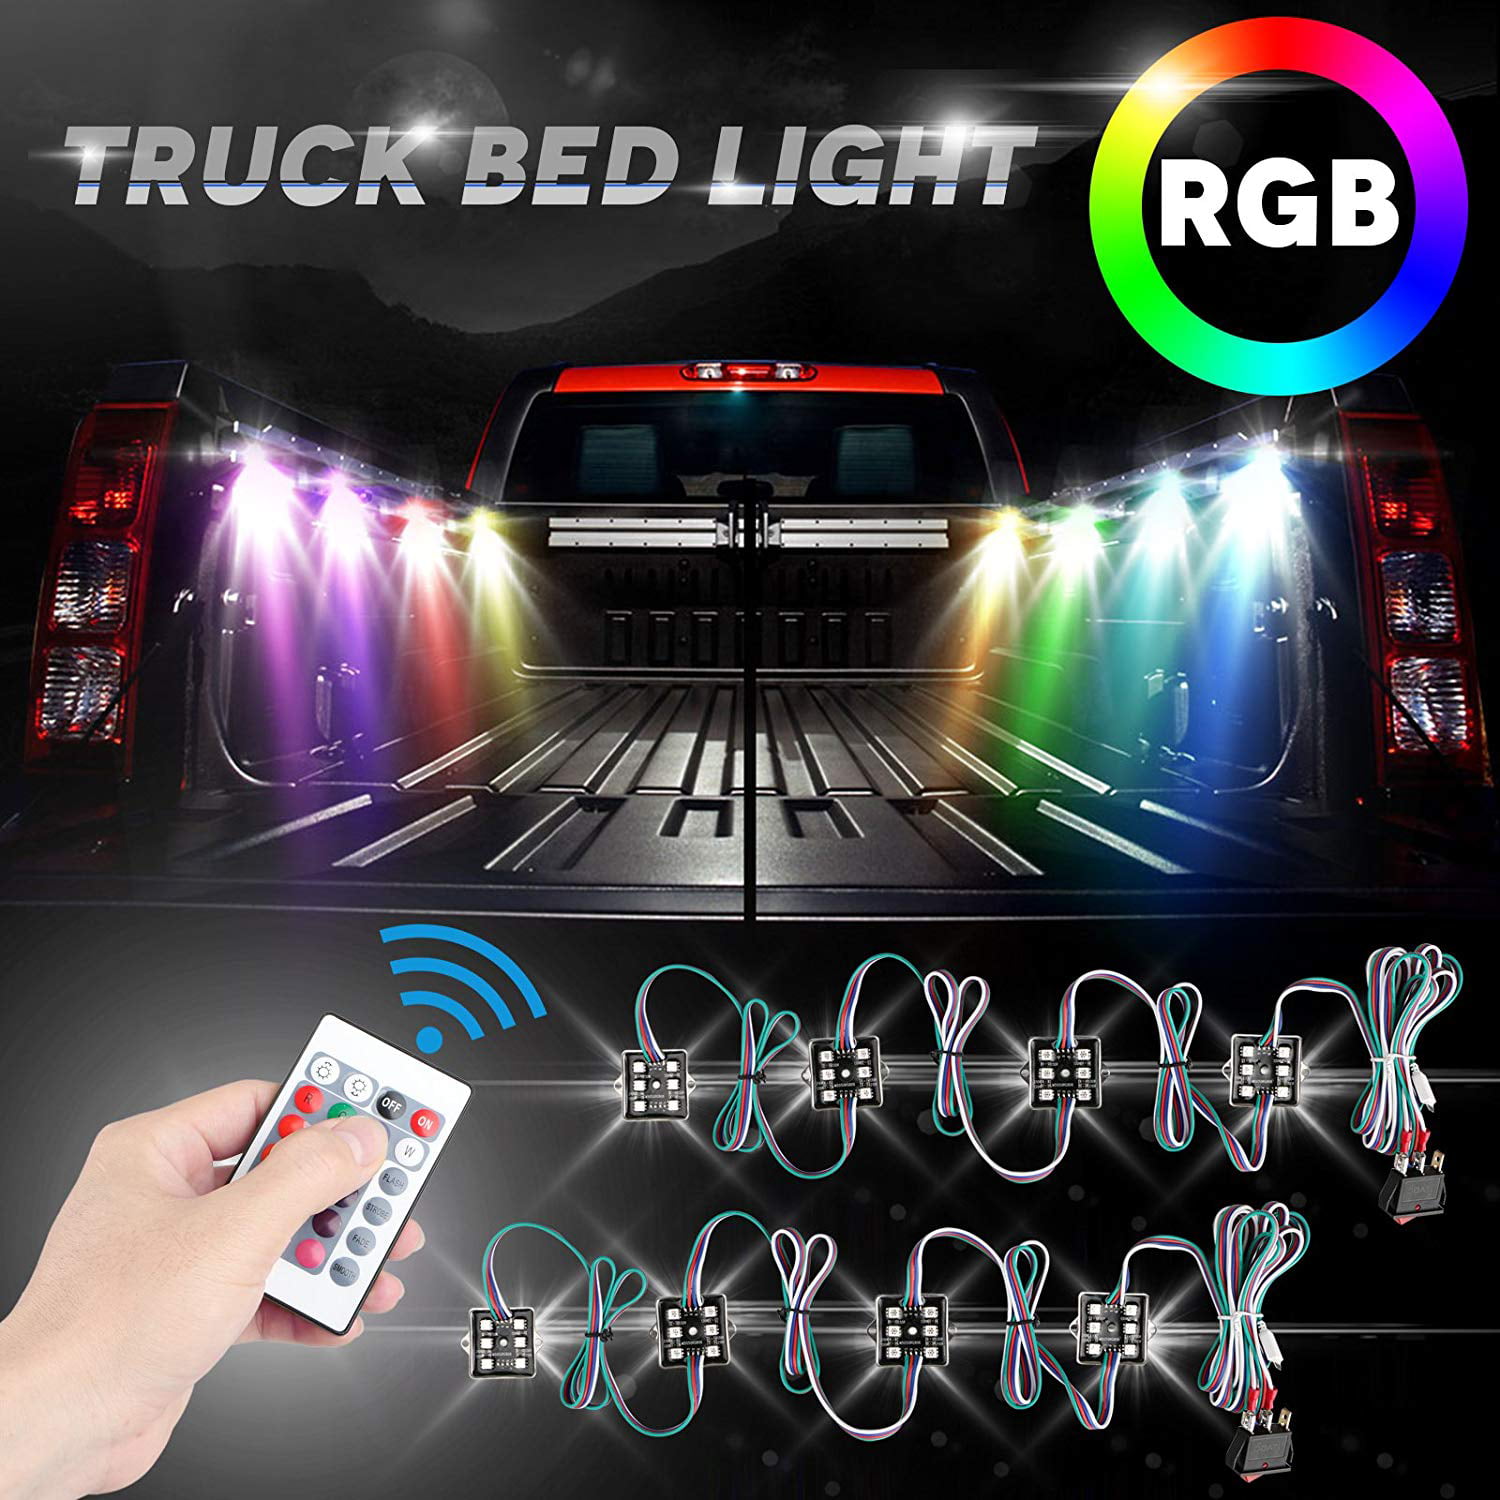 8 Pods RGB Multi-Color Truck Bed Lighting Kits with Bluetooth Control Waterproof for Cargo Off-Road Niking Auto LED Truck Pickup Bed Lights Under Car Trailer Rail Lights 